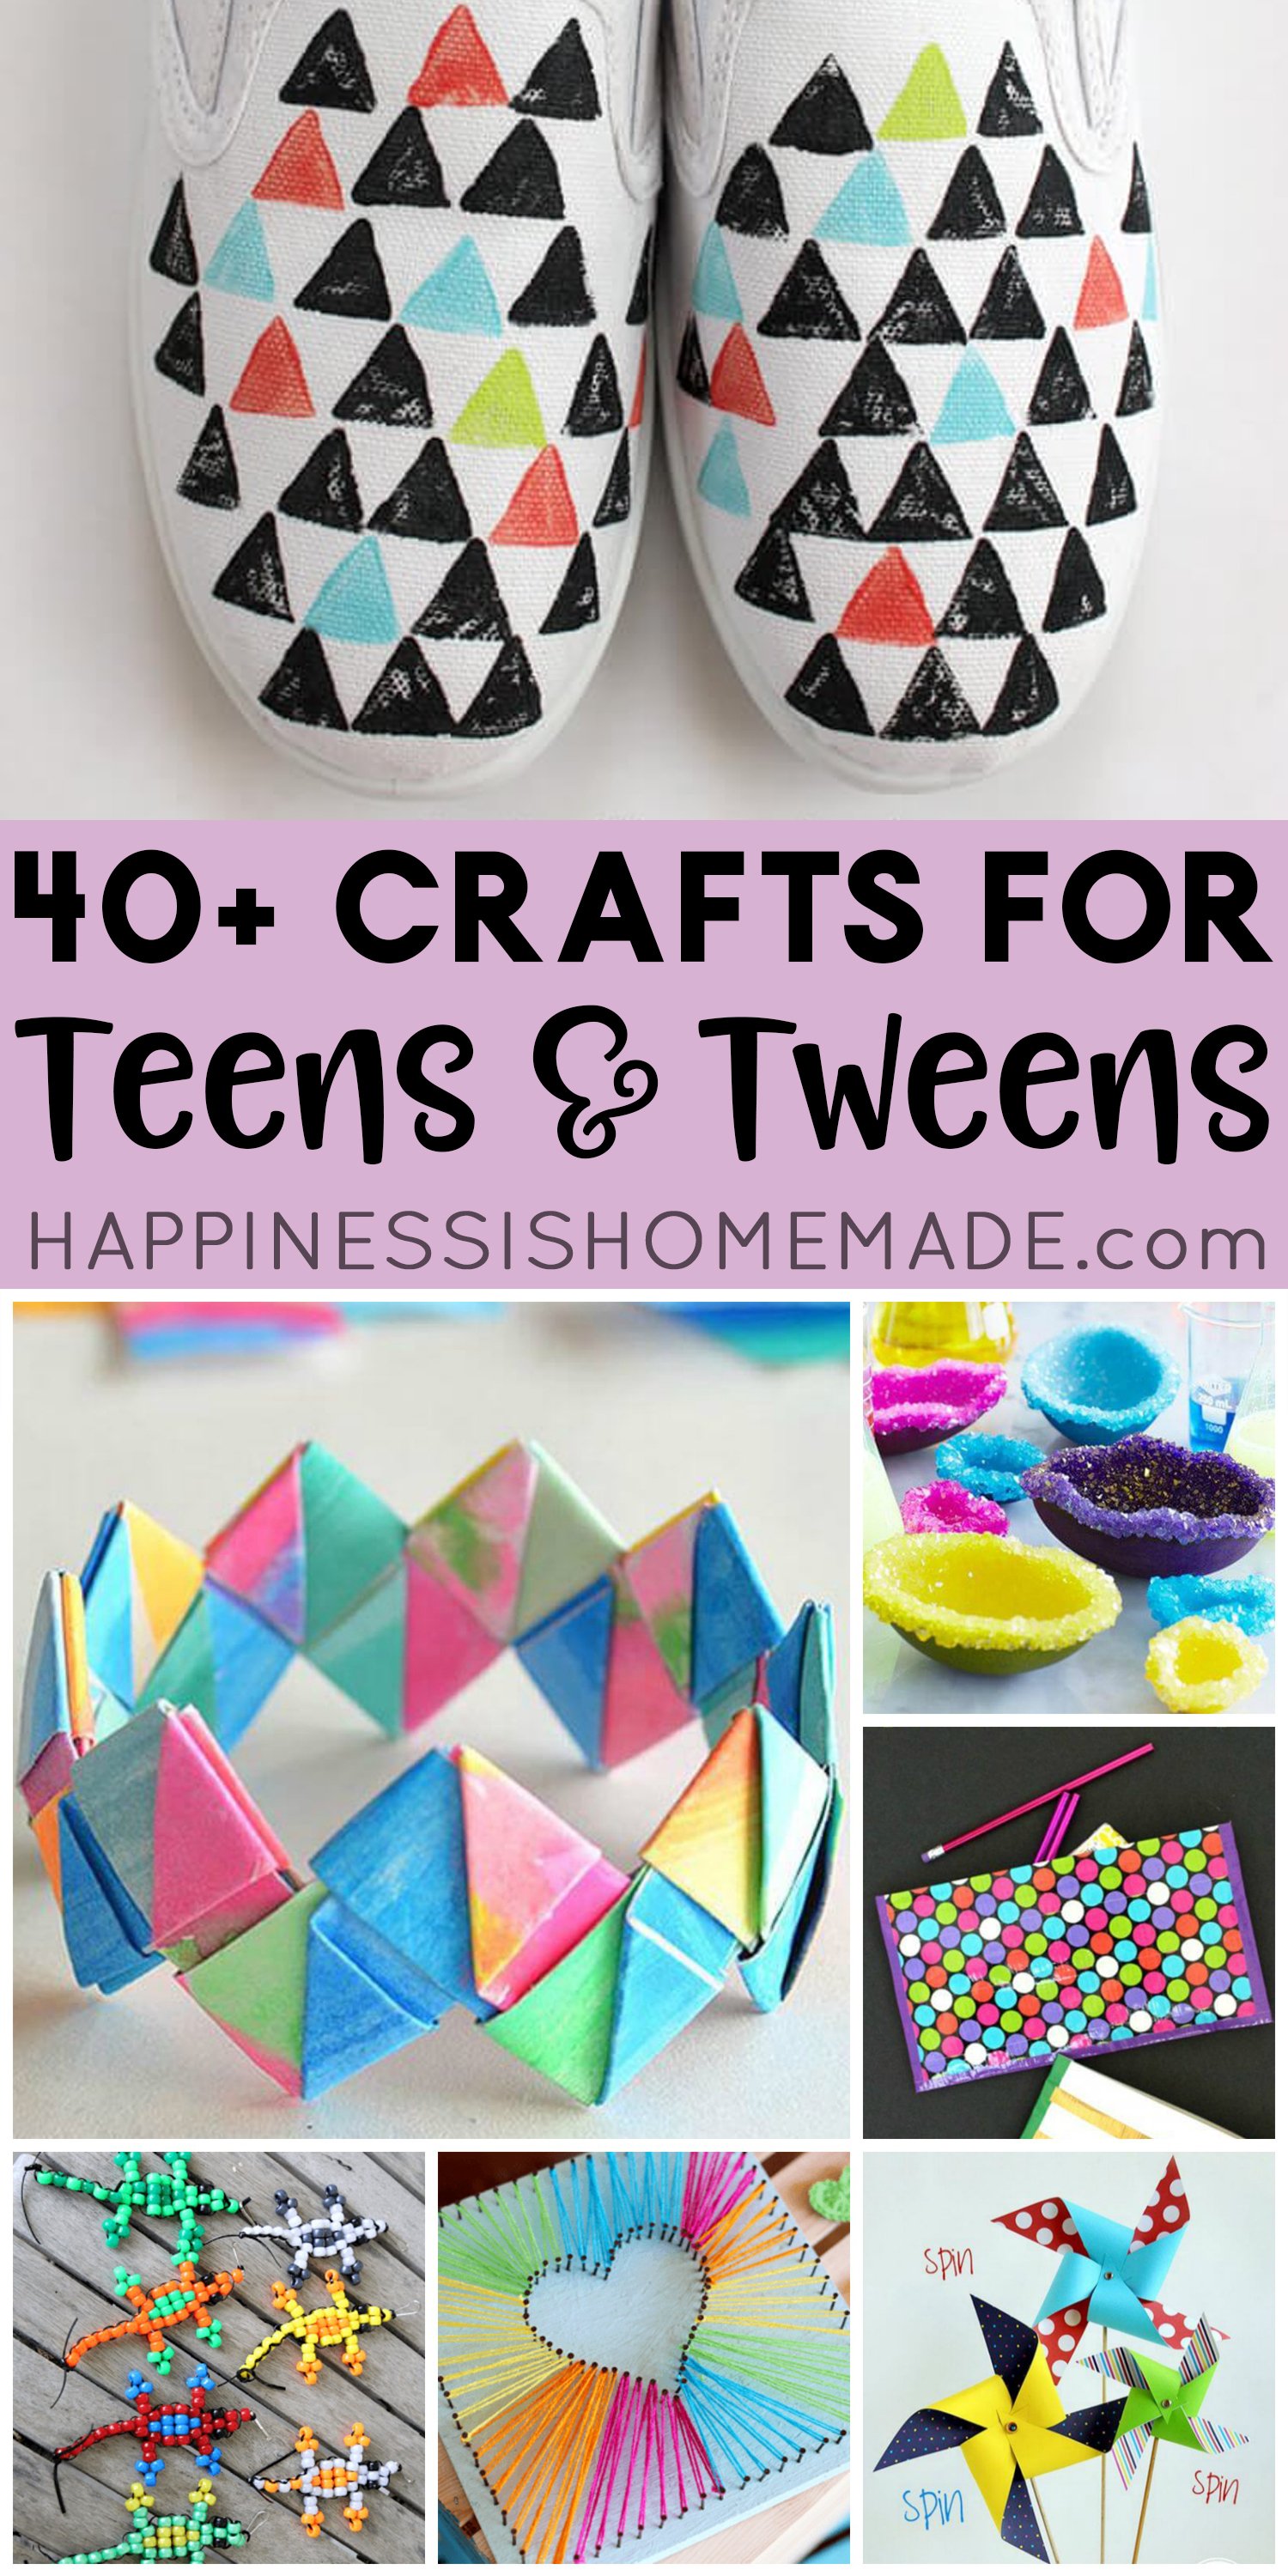 40+ crafts for teens and tweens